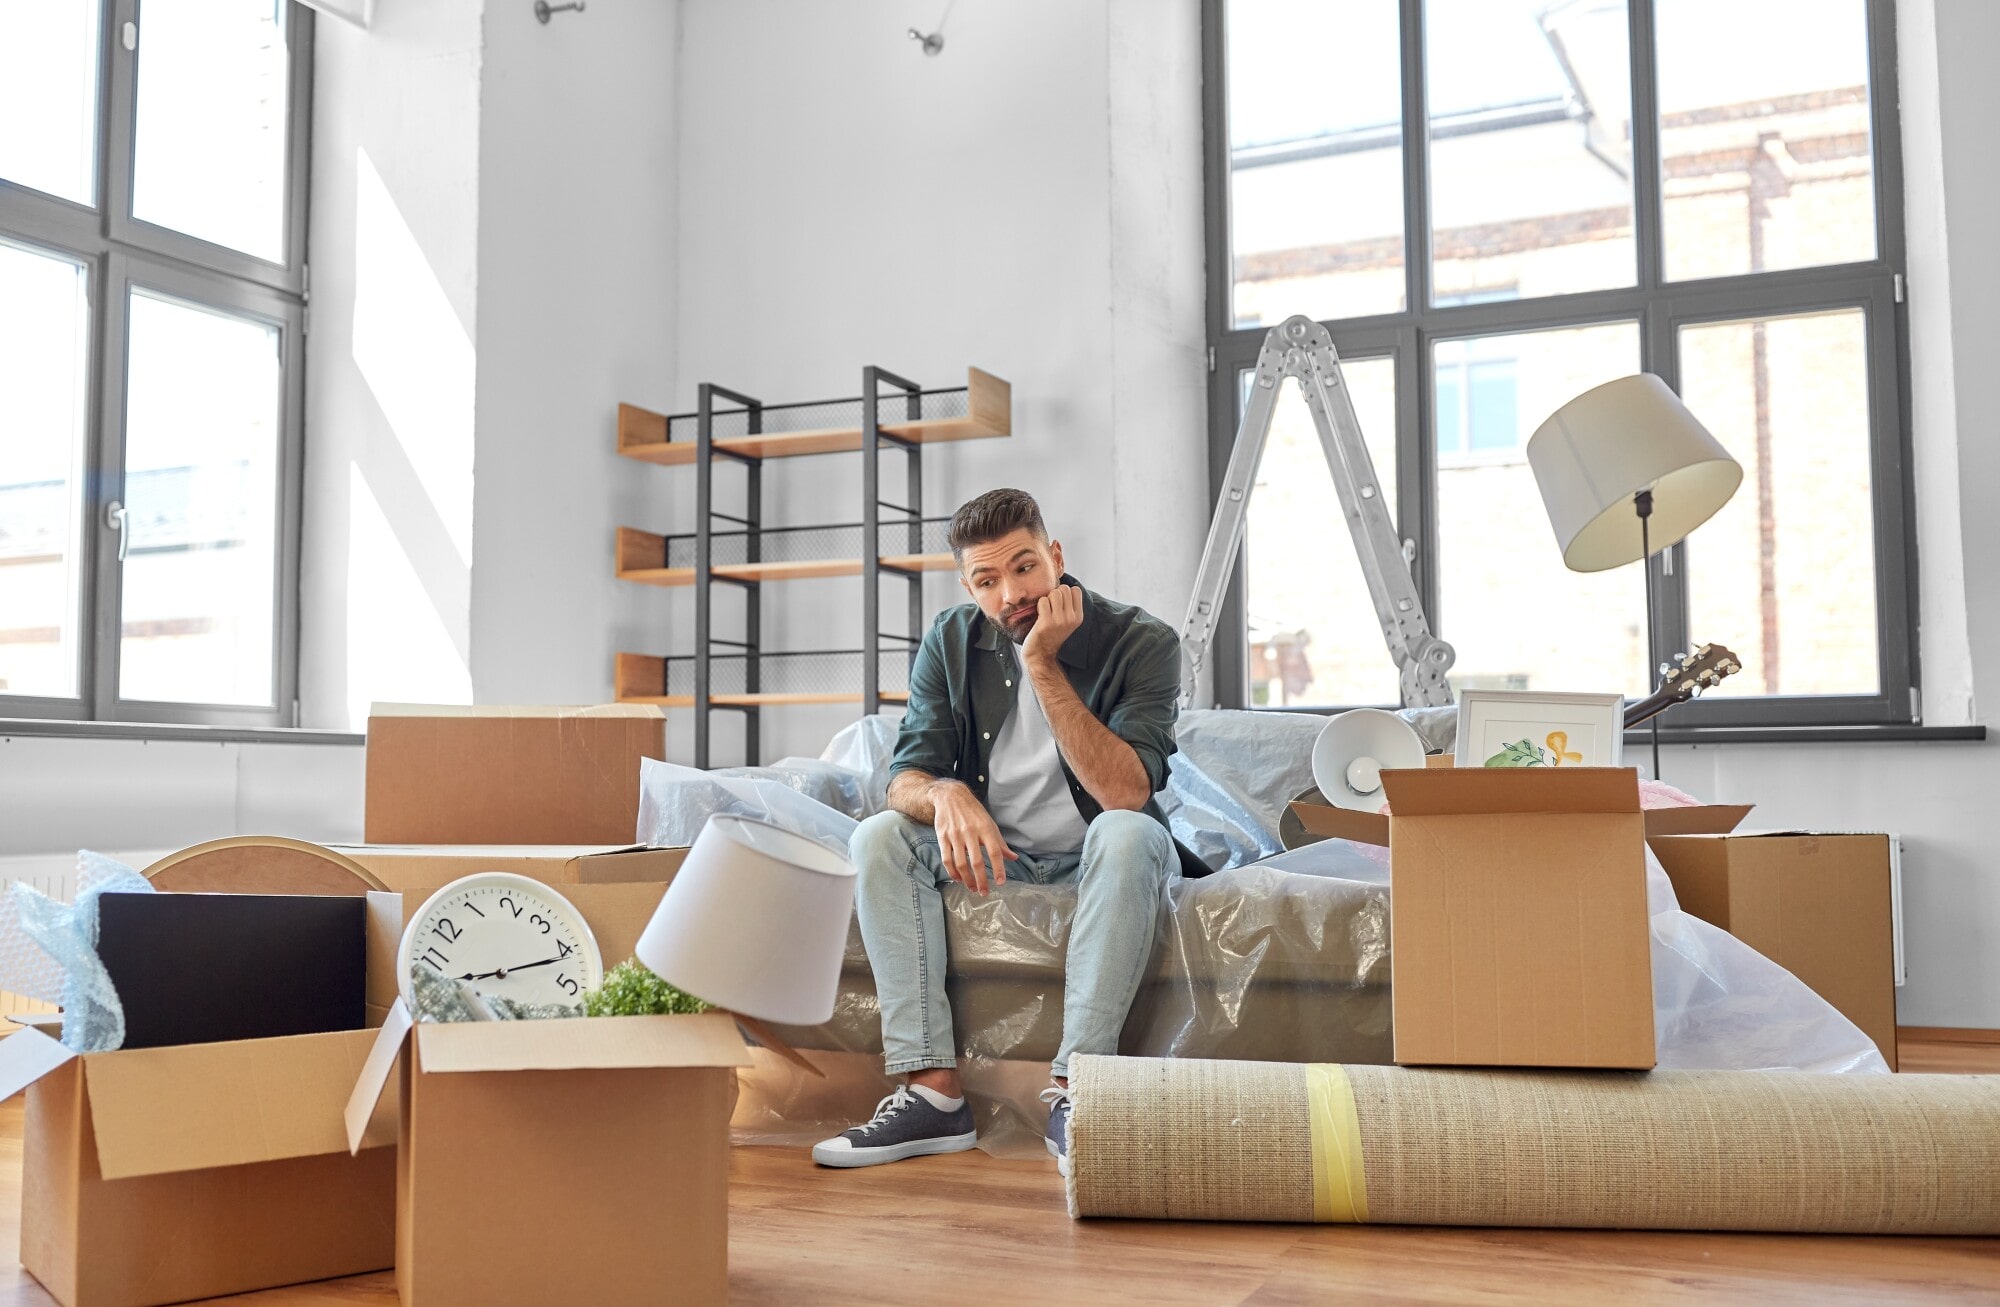 How a Property Management Company Can Help With Evictions